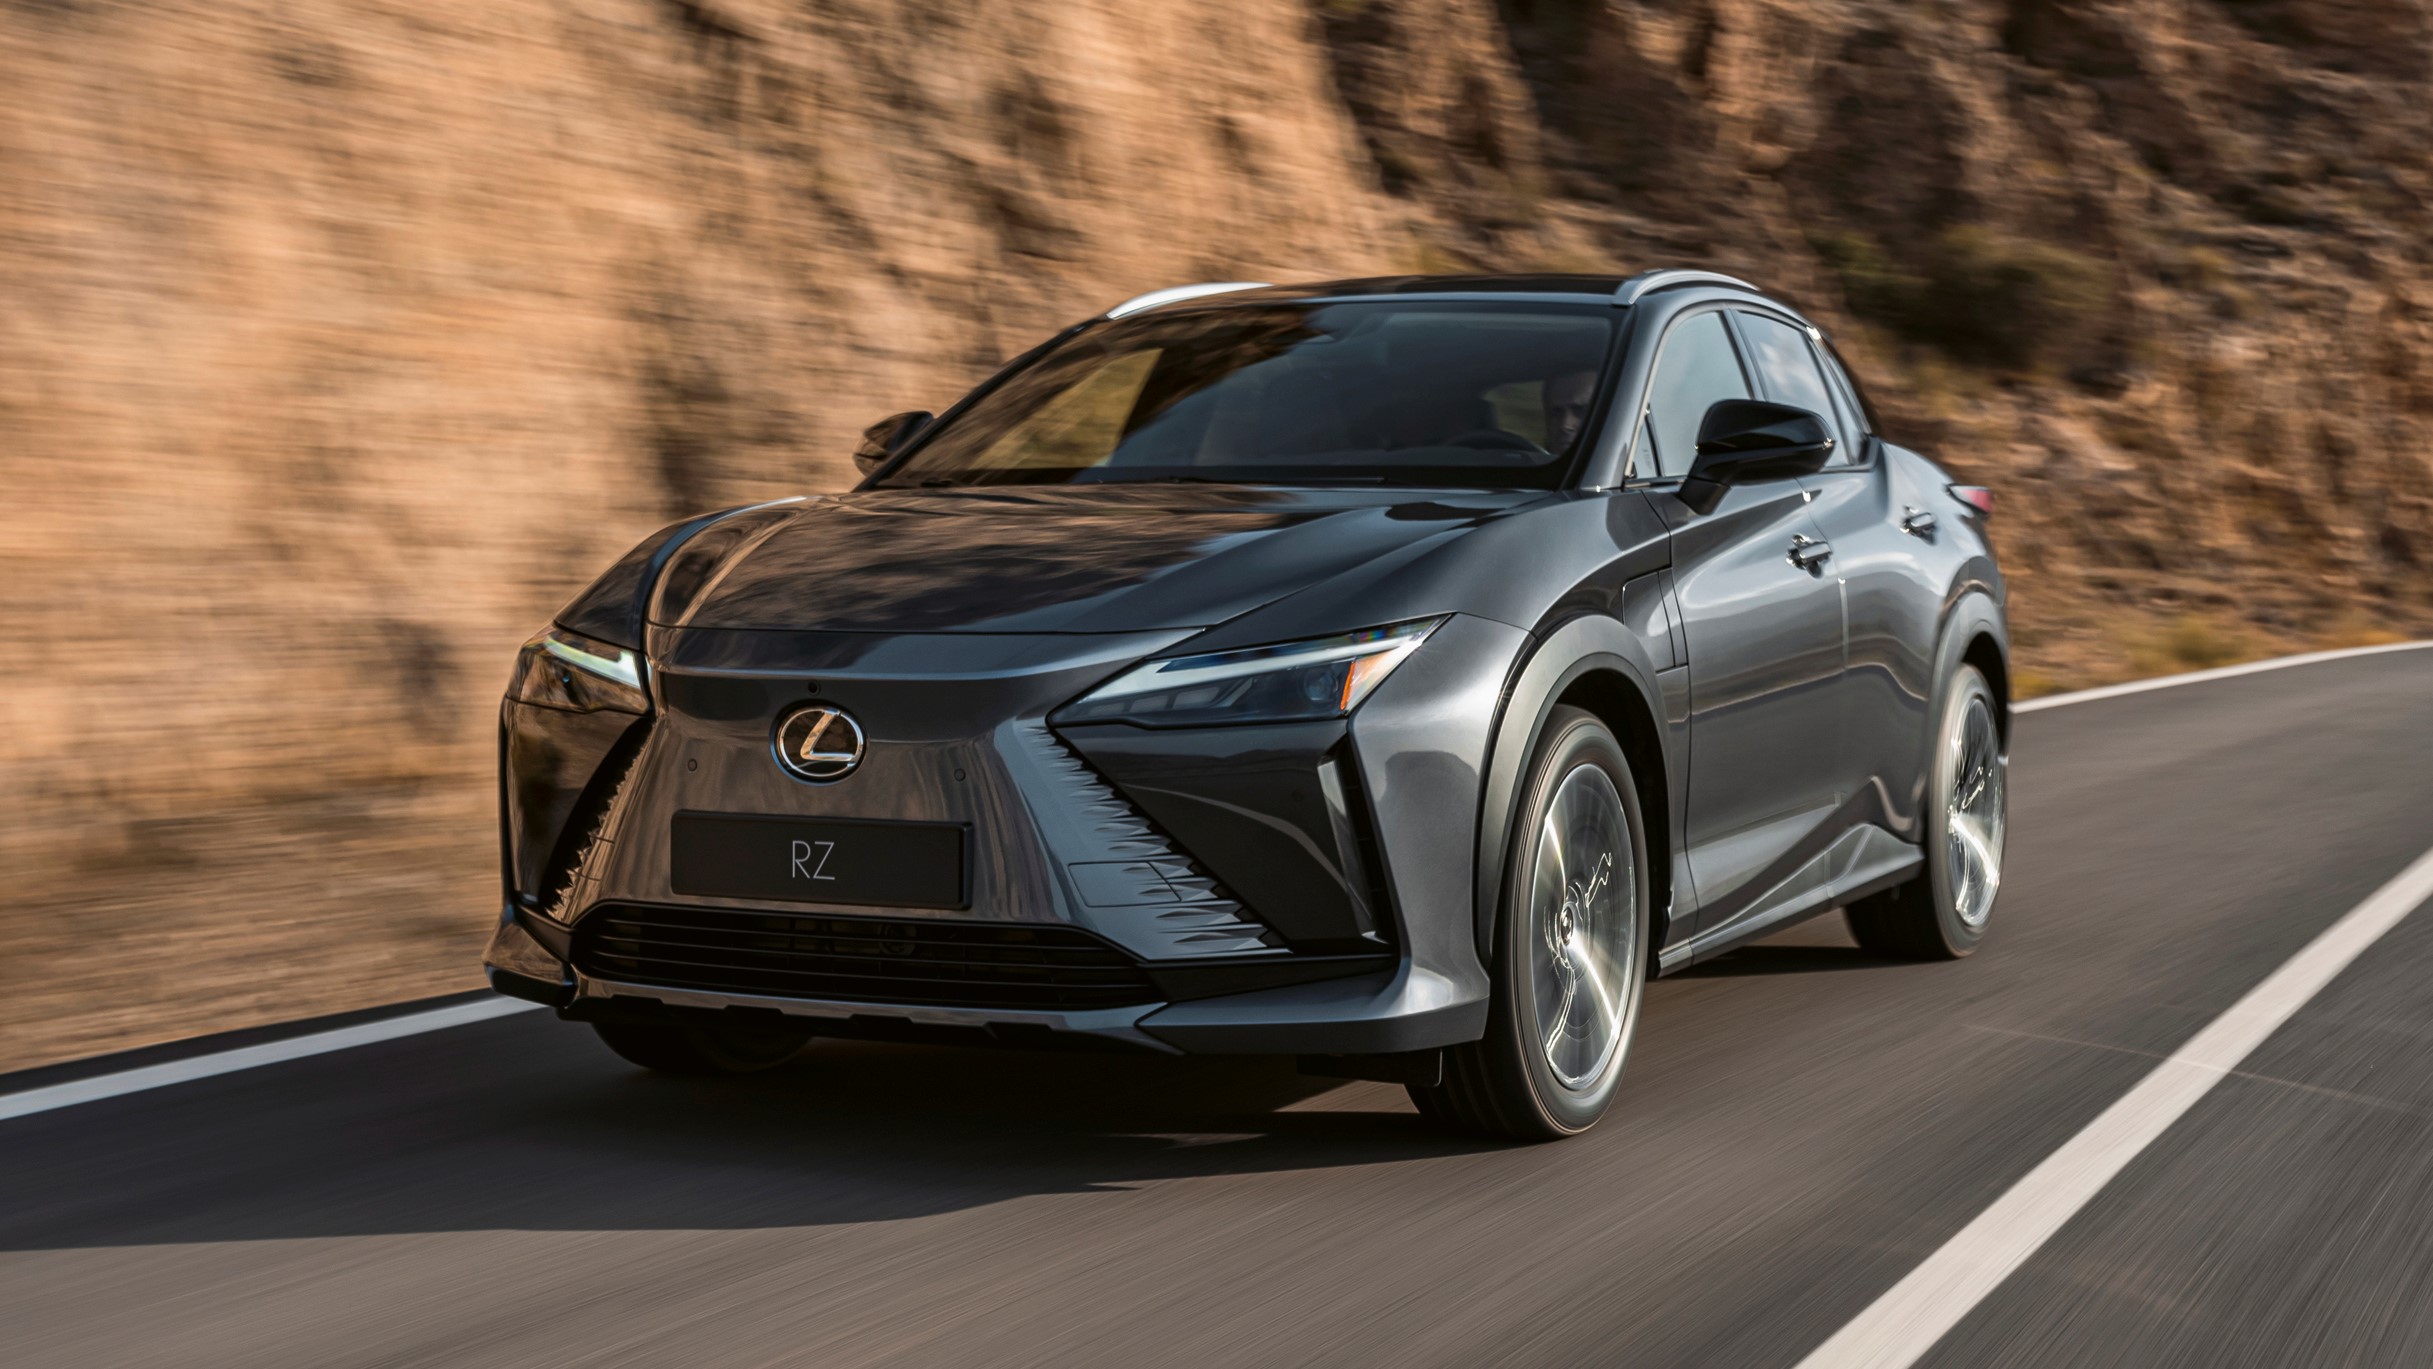 All-new 2023 Lexus RZ is the brand’s first pure battery EV